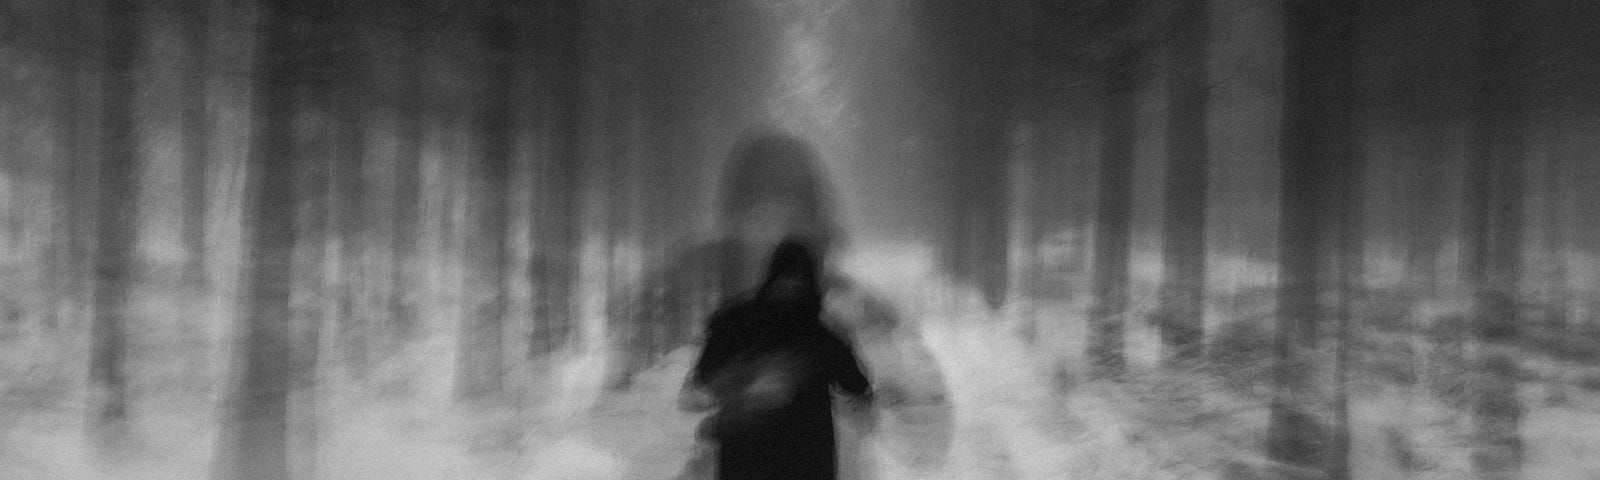 A blurry black and white image of a person in the woods.